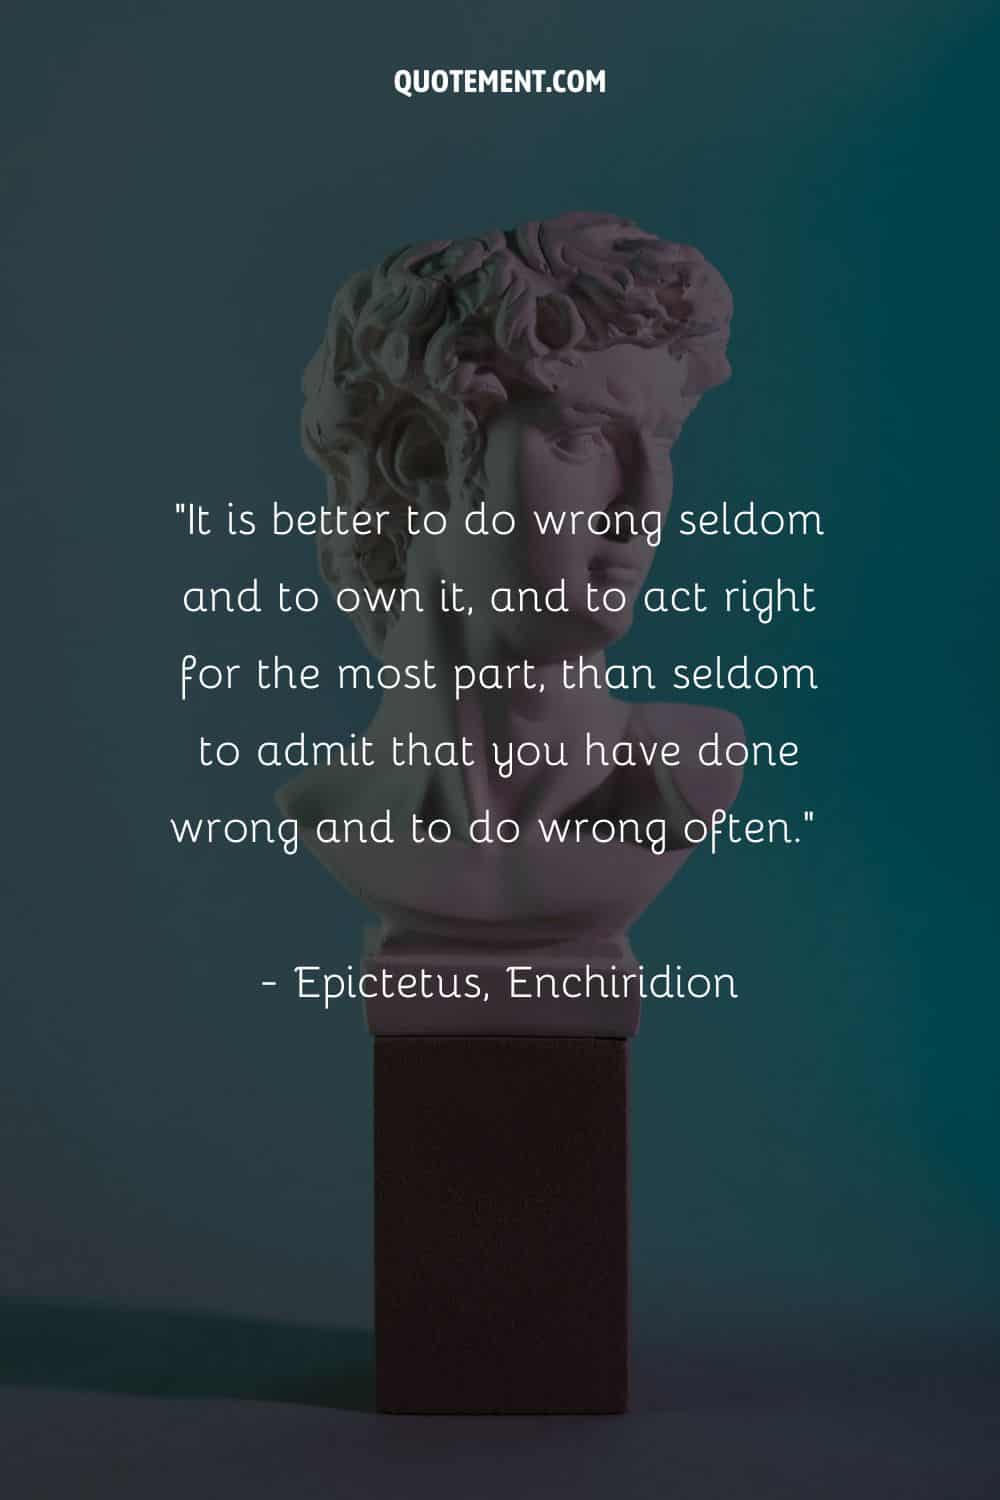 It is better to do wrong seldom and to own it, and to act right for the most part, than seldom to admit that you have done wrong and to do wrong often.